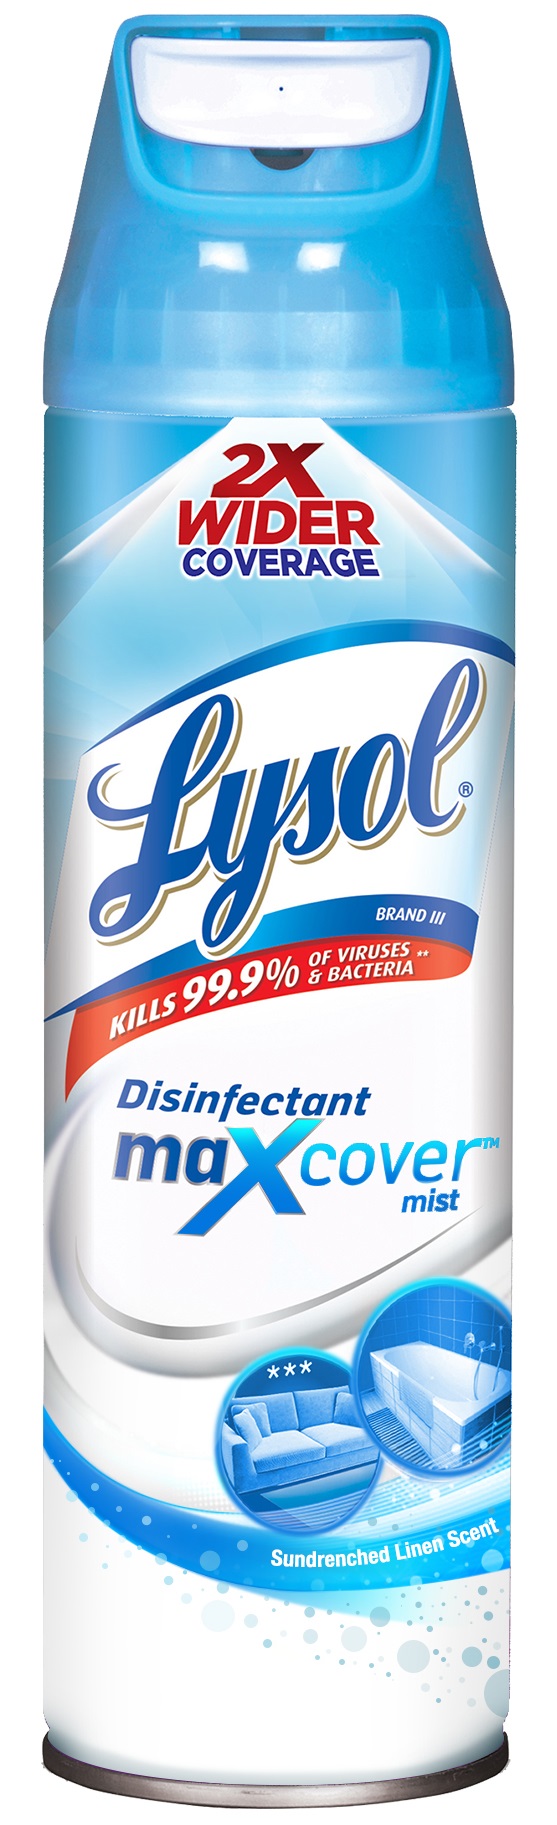 LYSOL Disinfectant Max Cover Mist  Sundrenched Linen